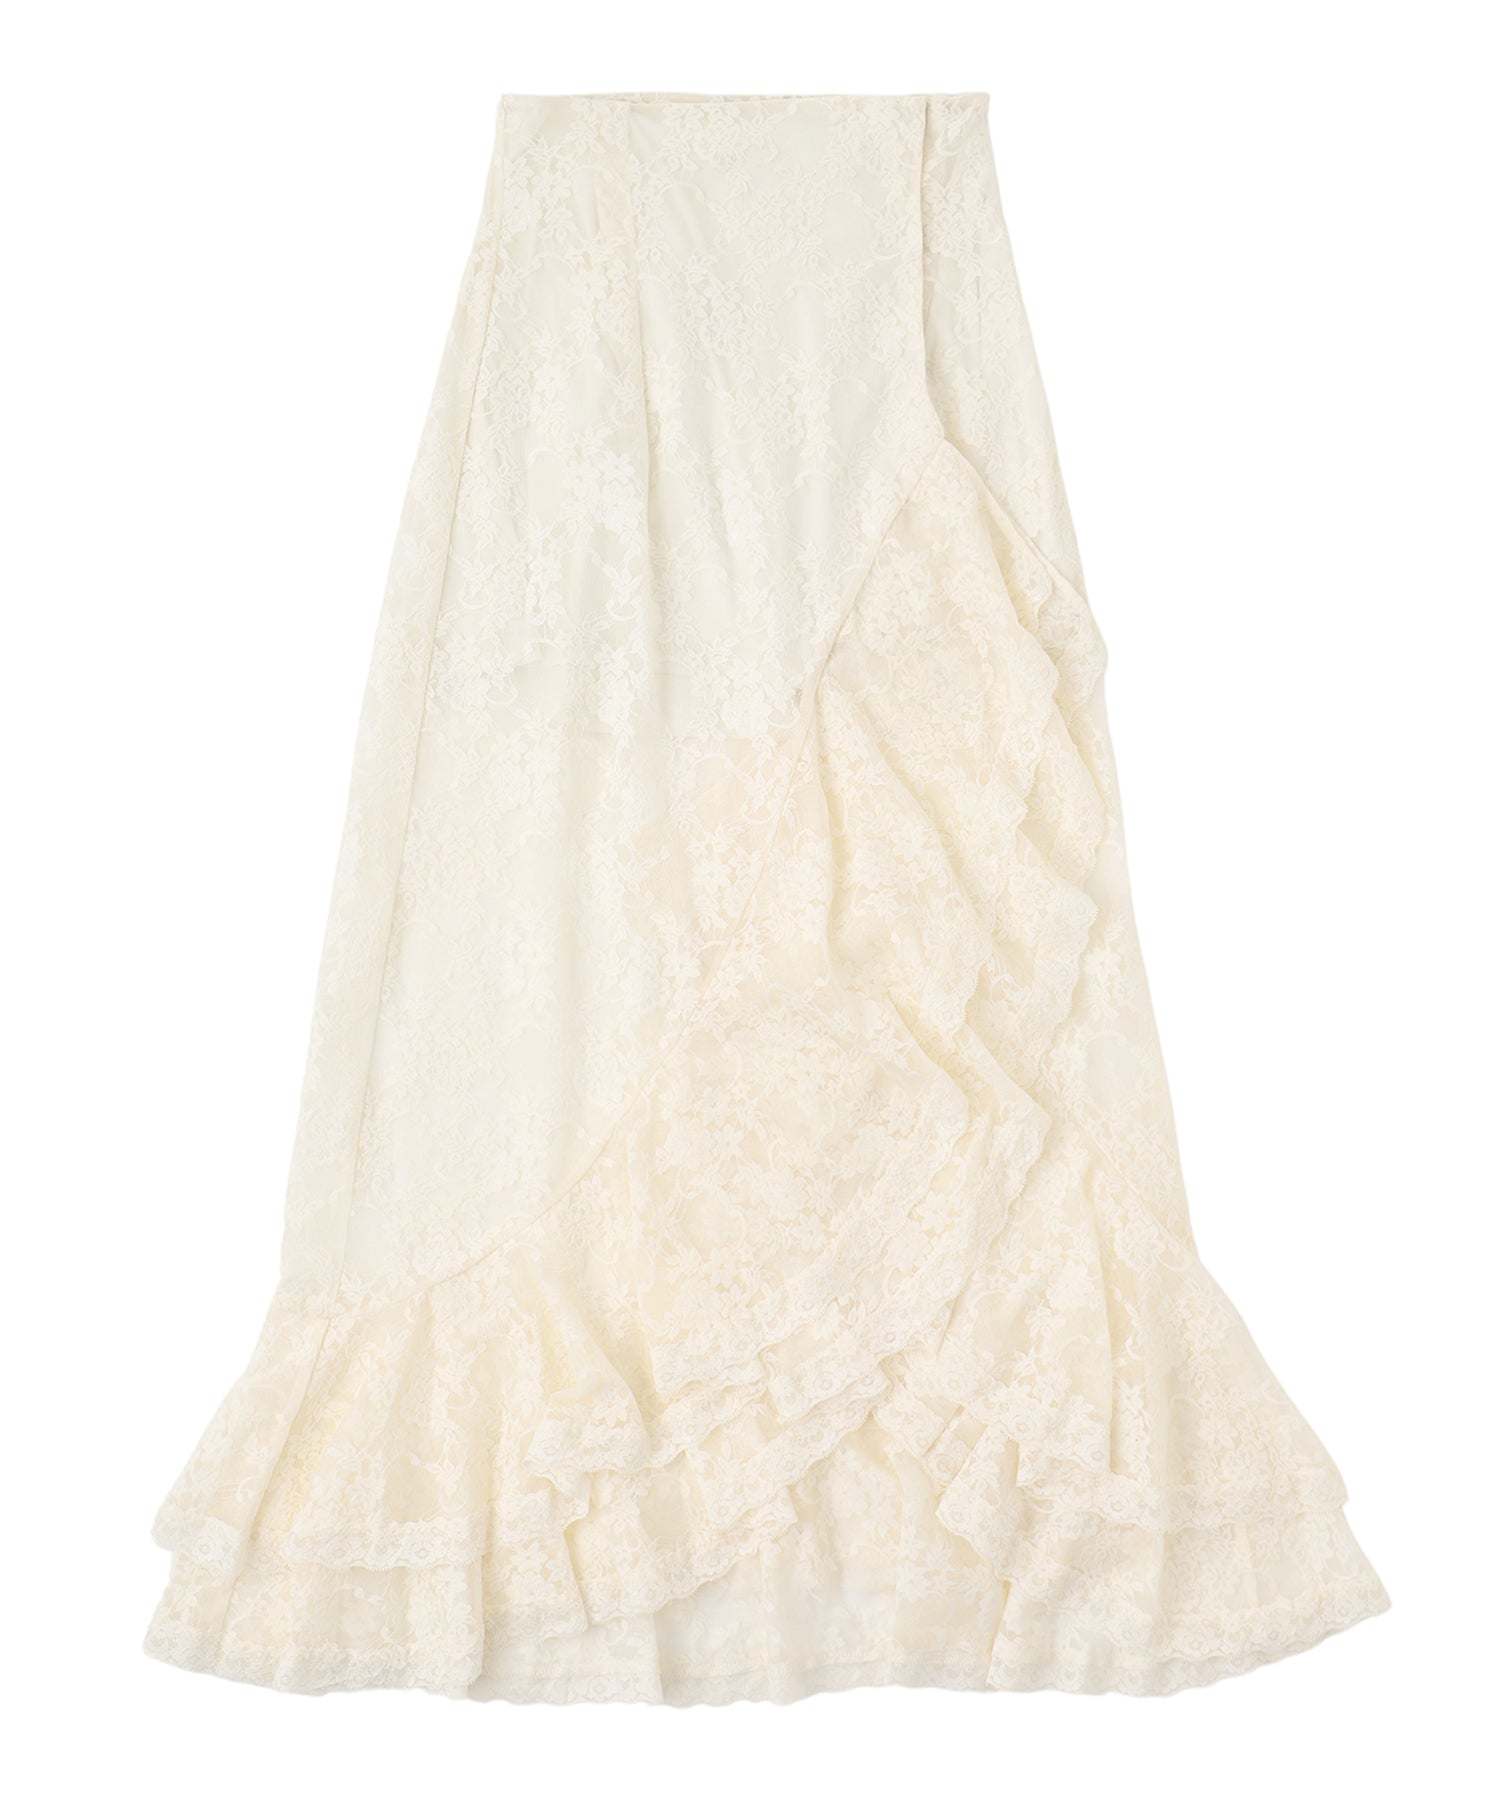 Lace frill wrap skirt